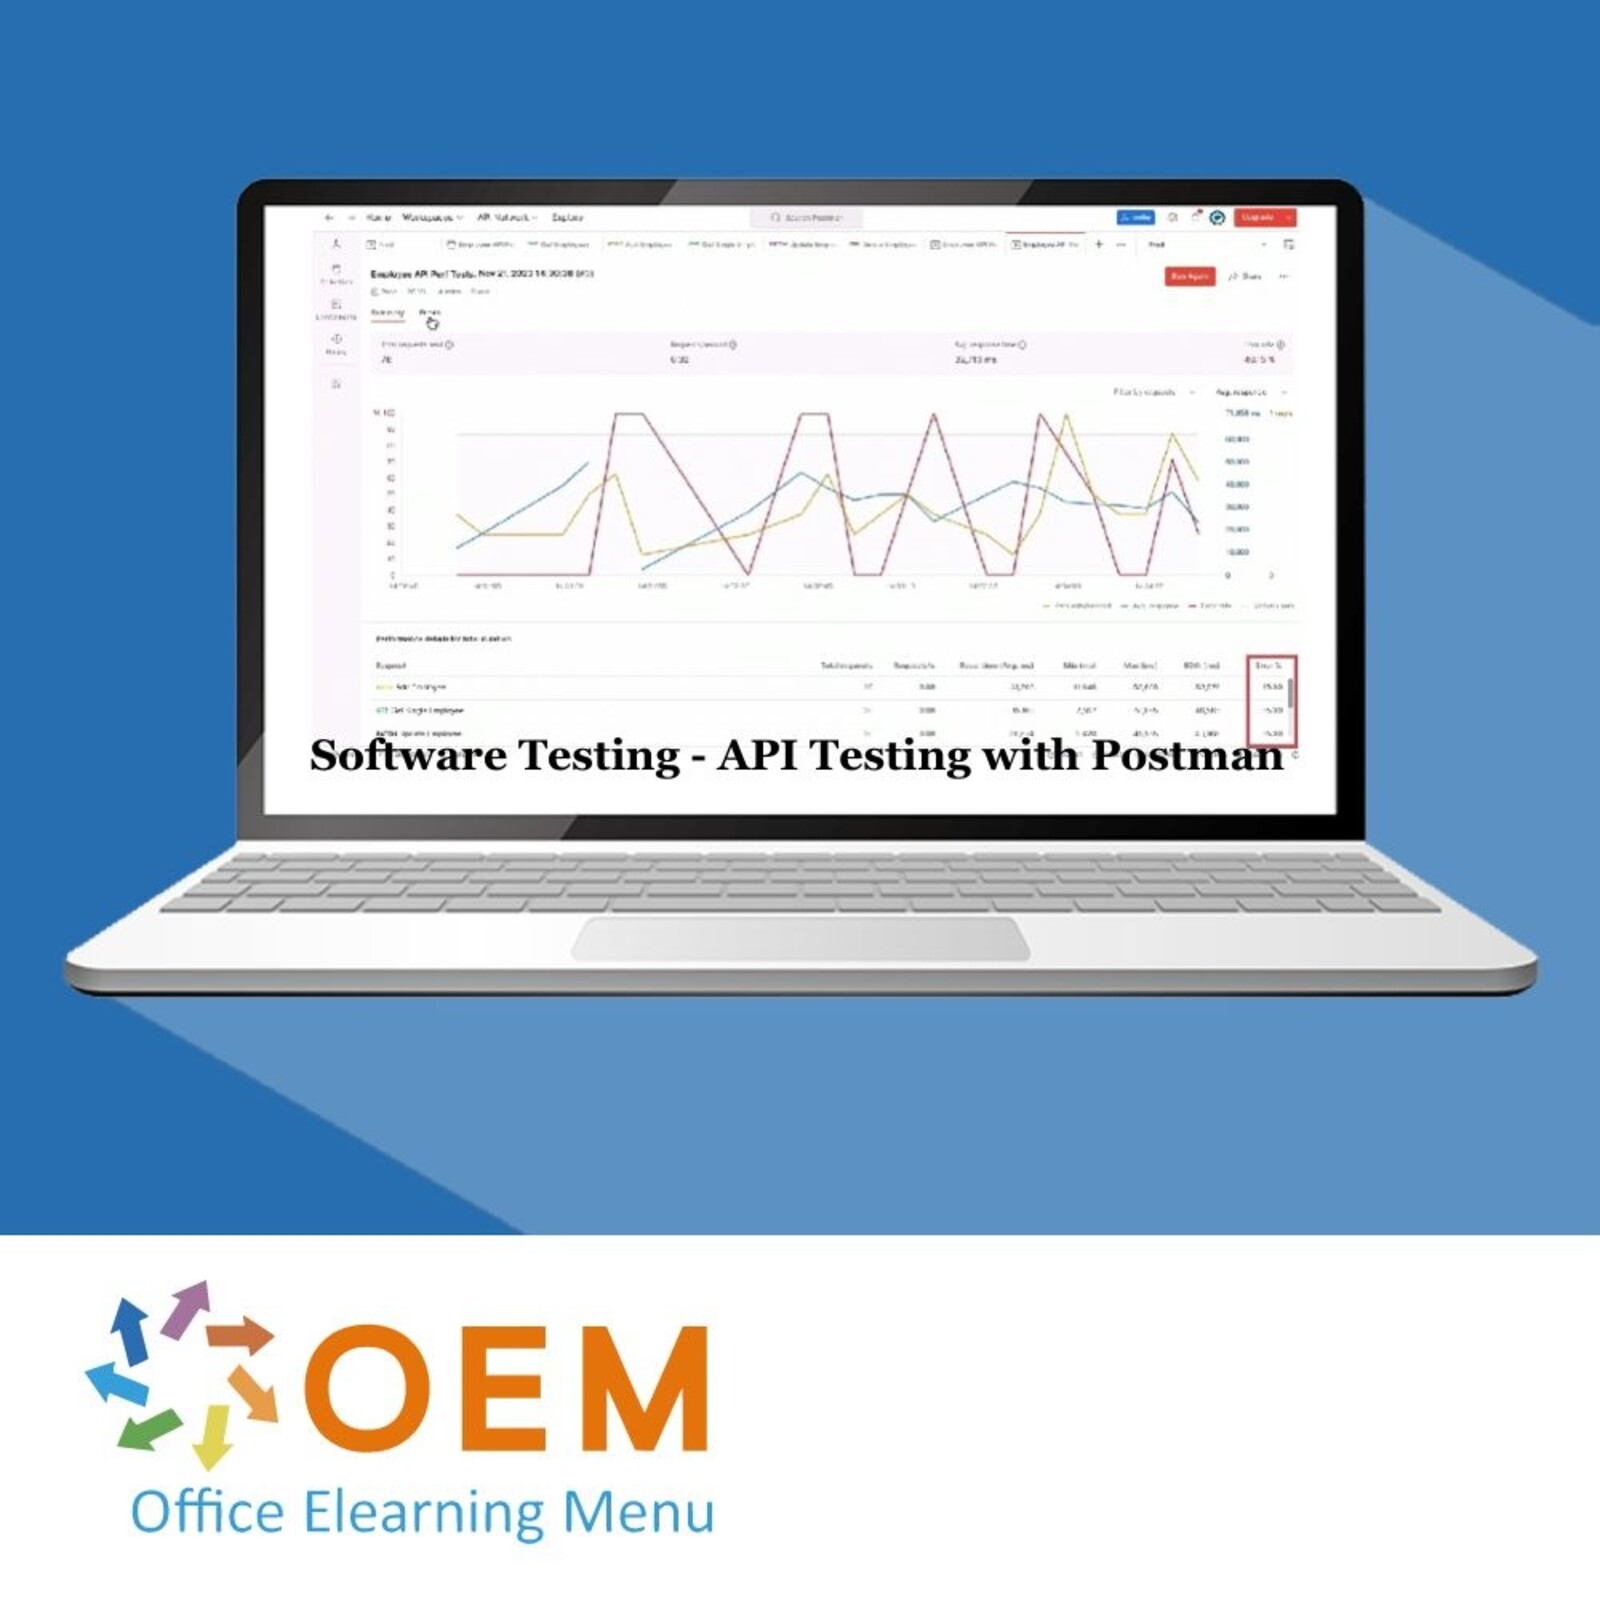 Microservices Software Testing - API Testing with Postman Training